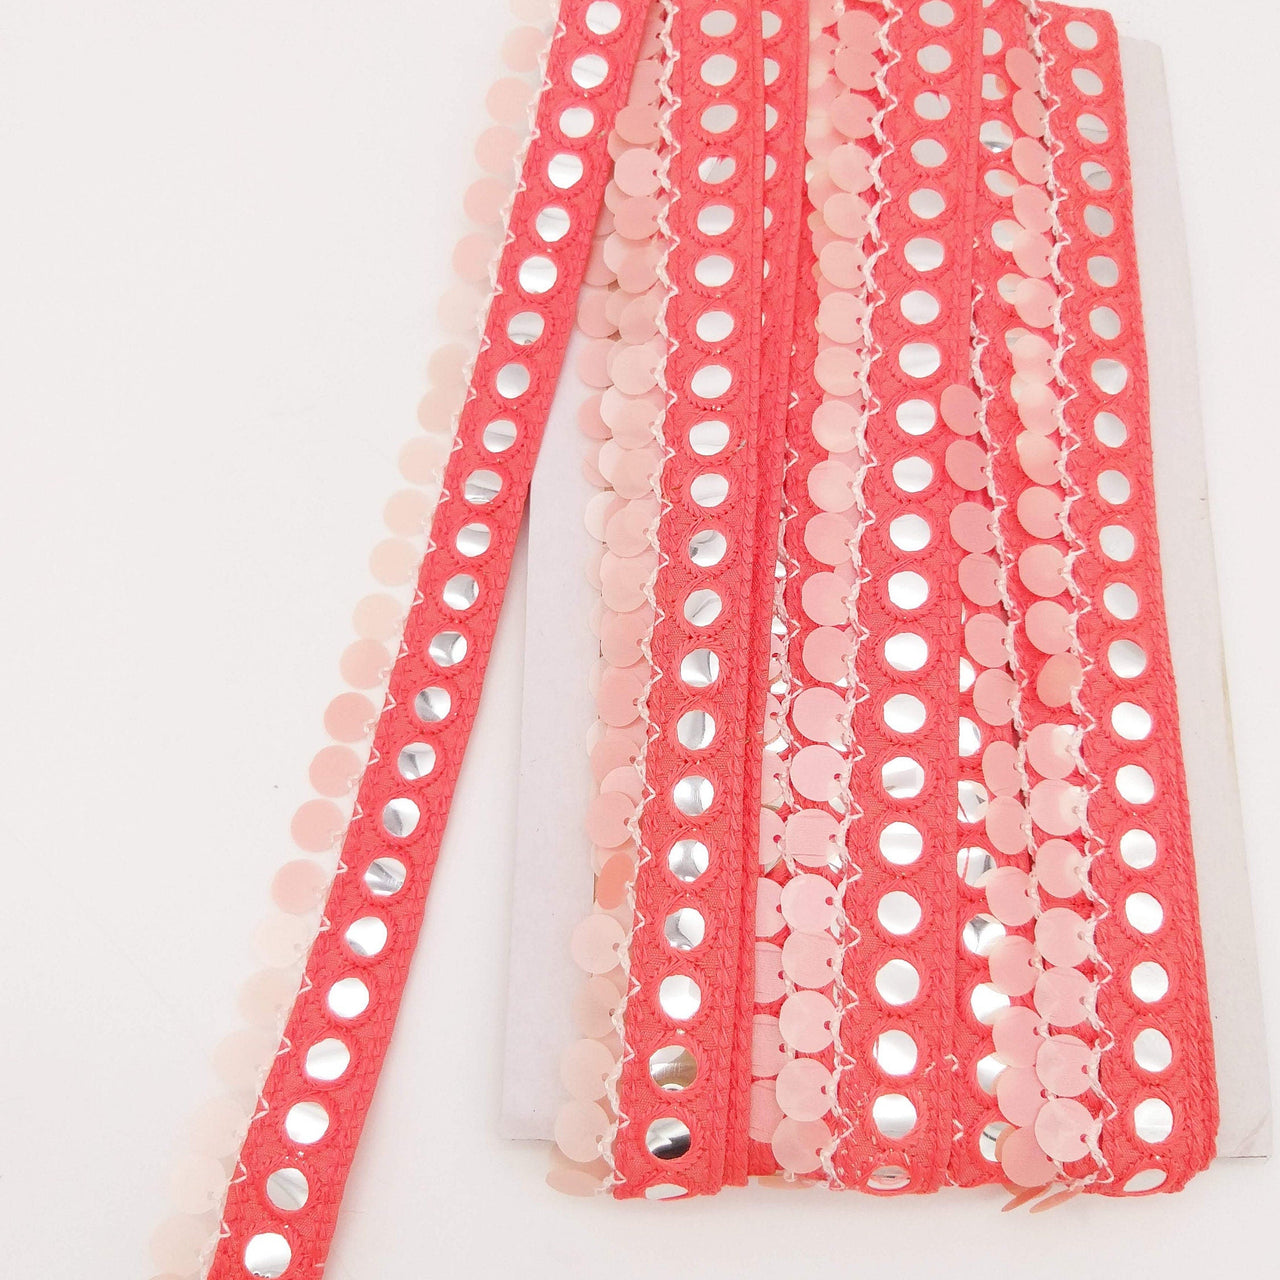 Salmon Pink Fringe Trim With Mirrors And Sequins Tassels, Boho, Bohemian Trim